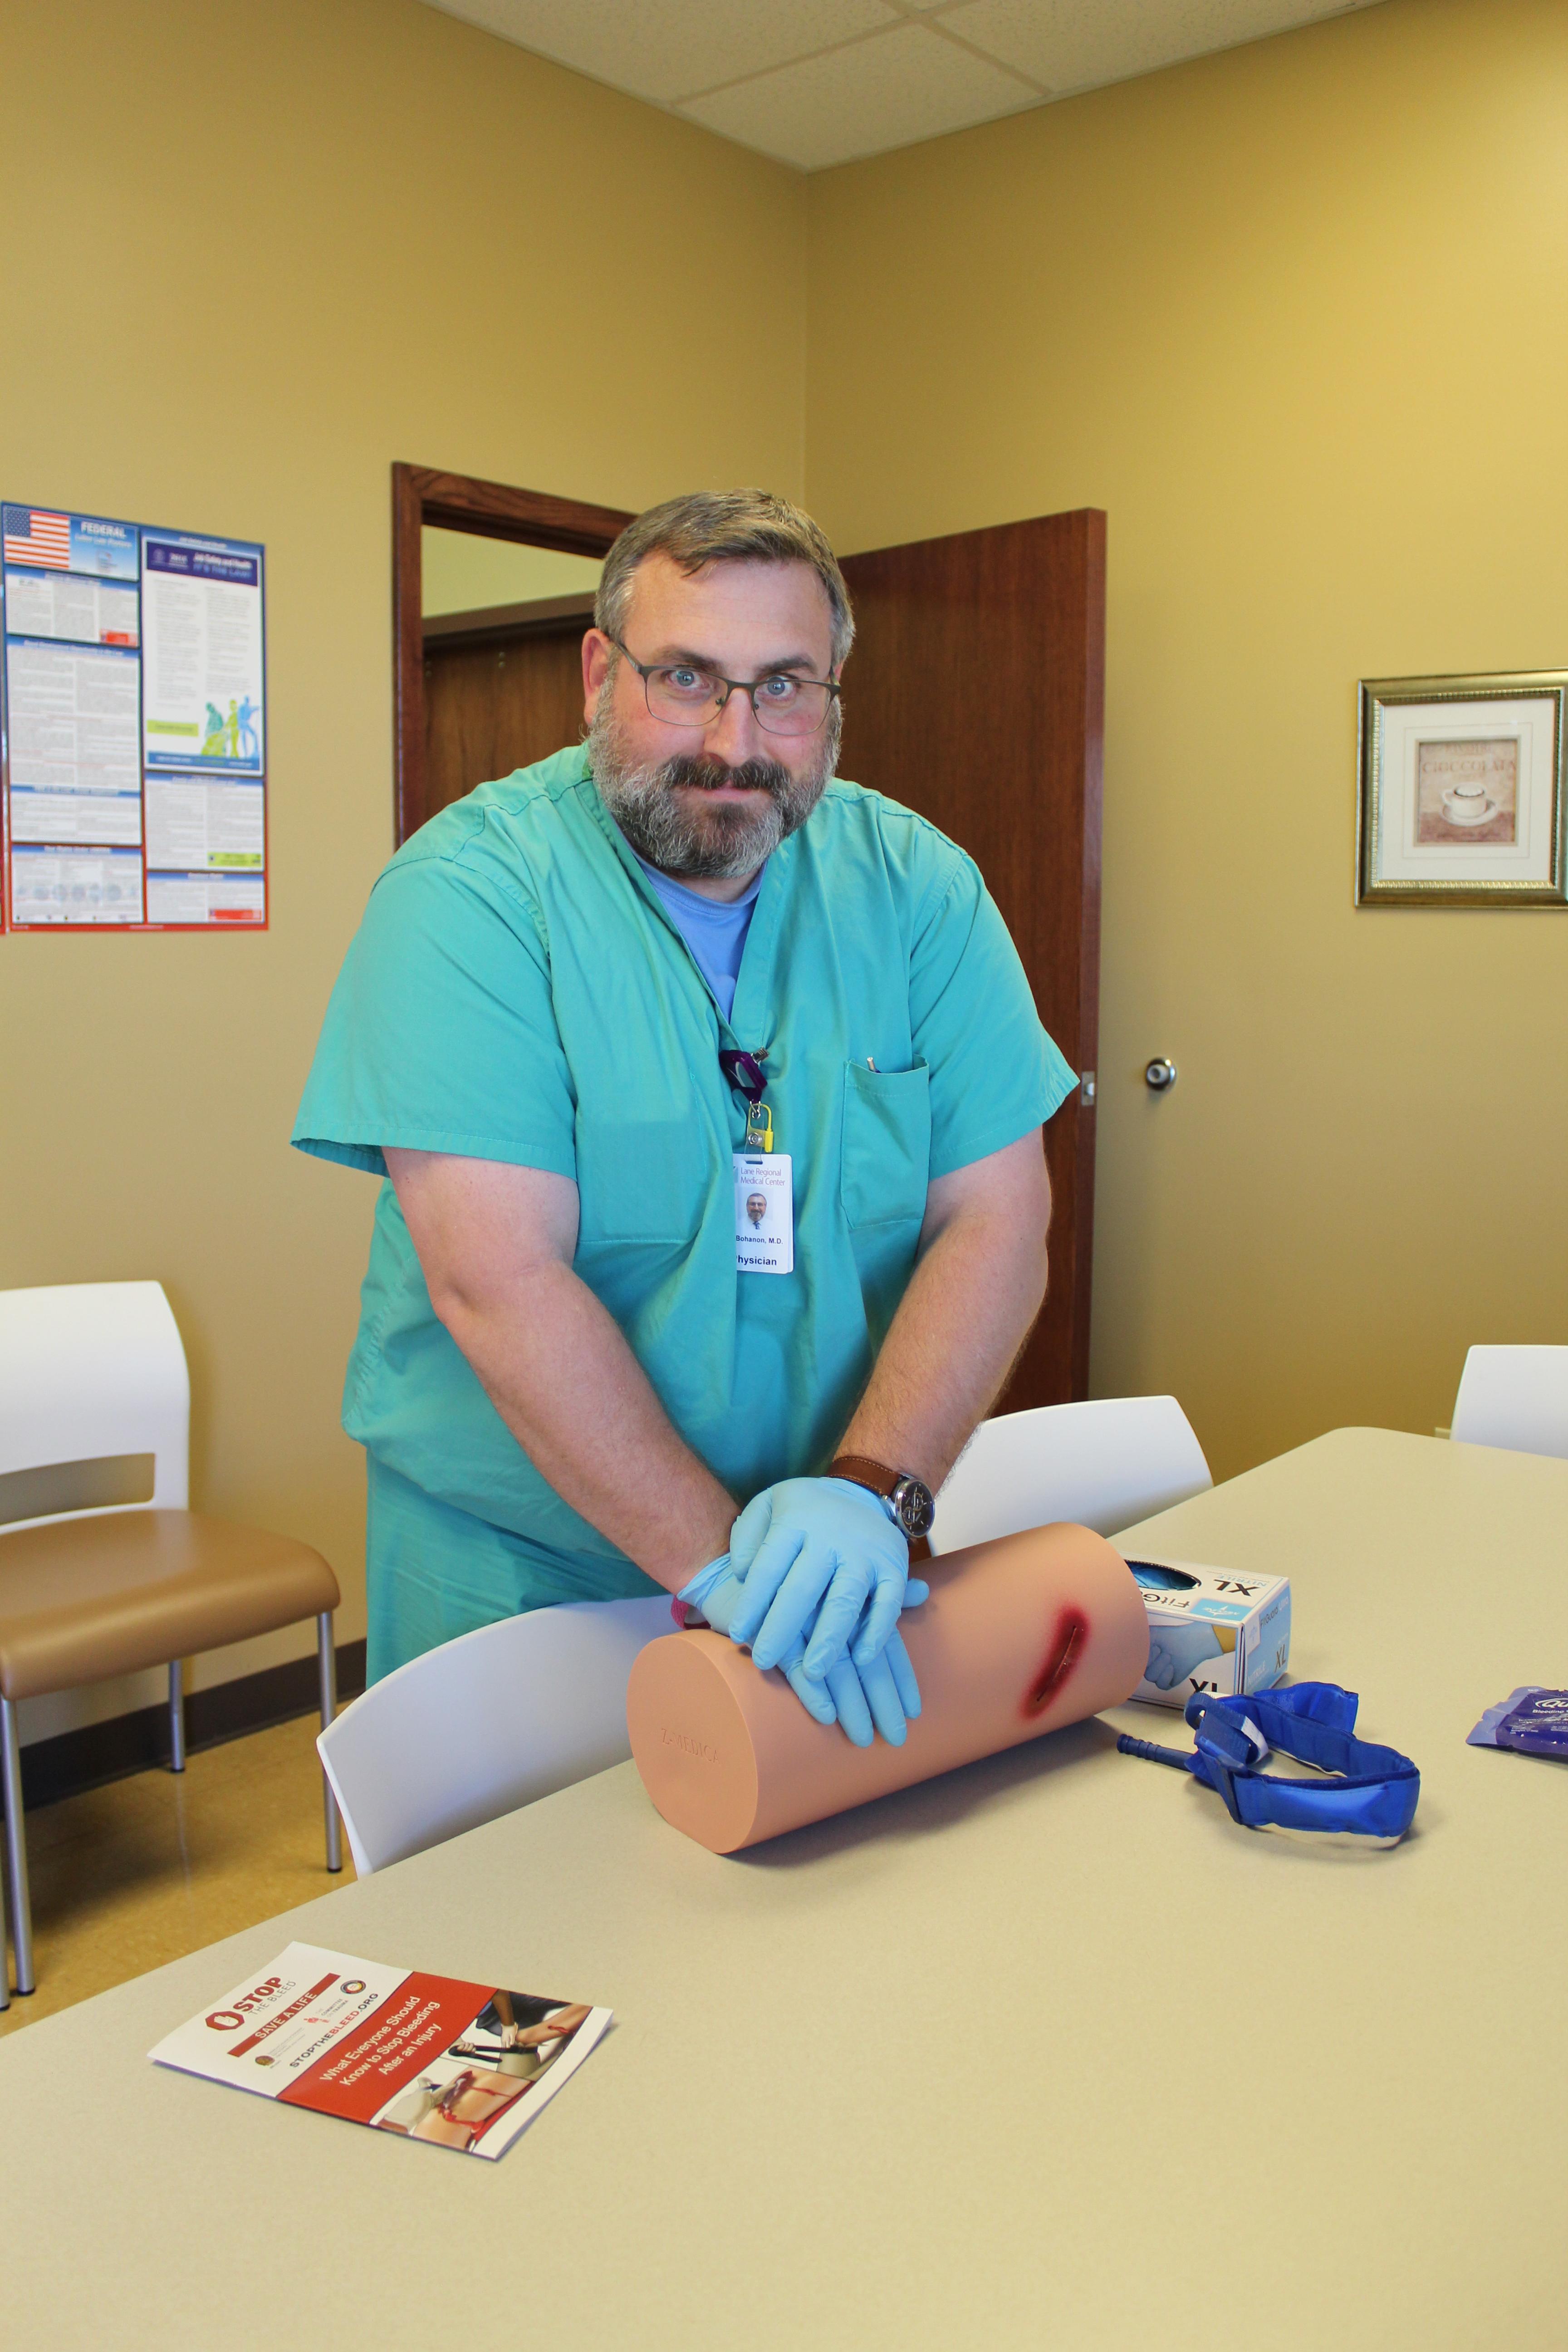 FREE "Stop the Bleed" Training